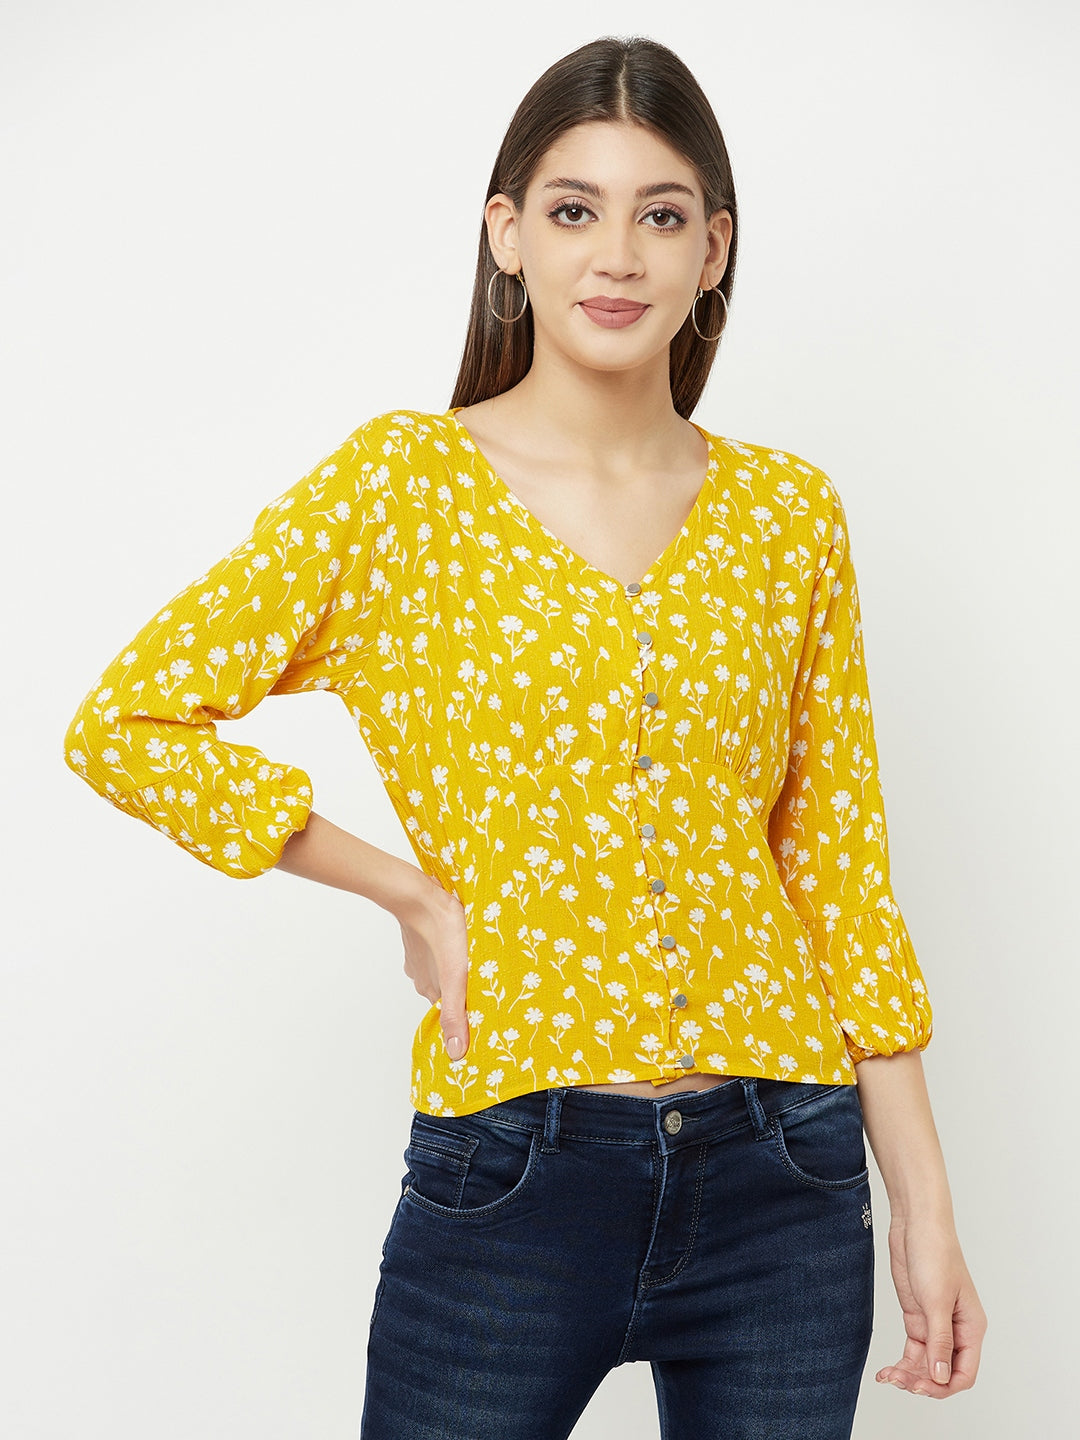 Yellow Floral Printed V-Neck Cropped Top - Women Tops